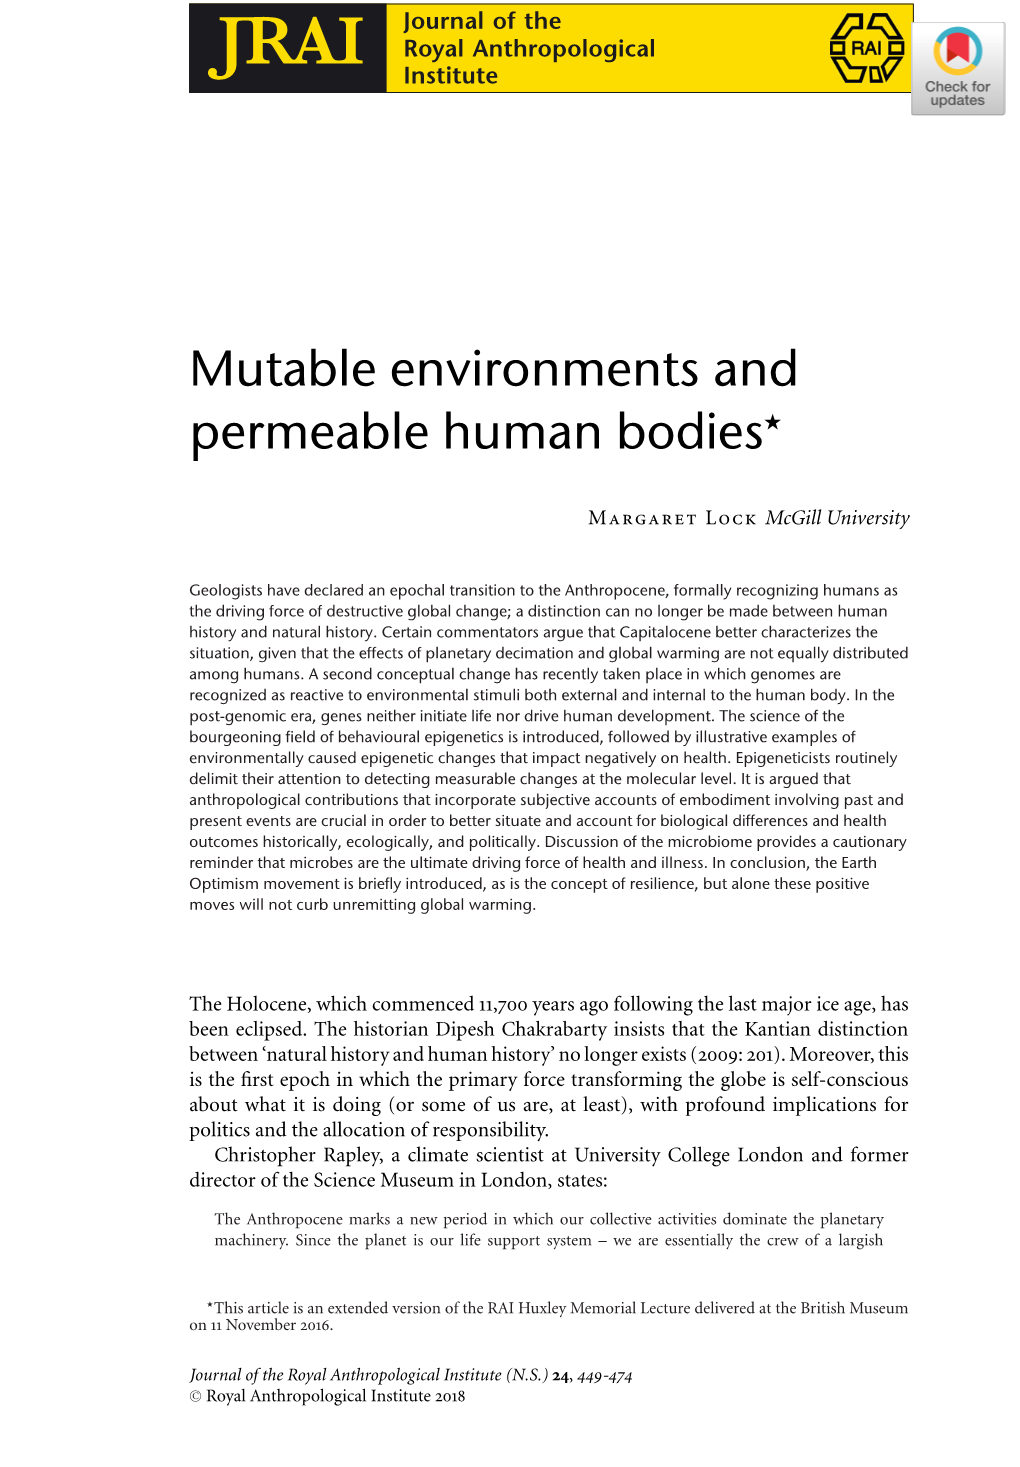 Mutable Environments and Permeable Human Bodies